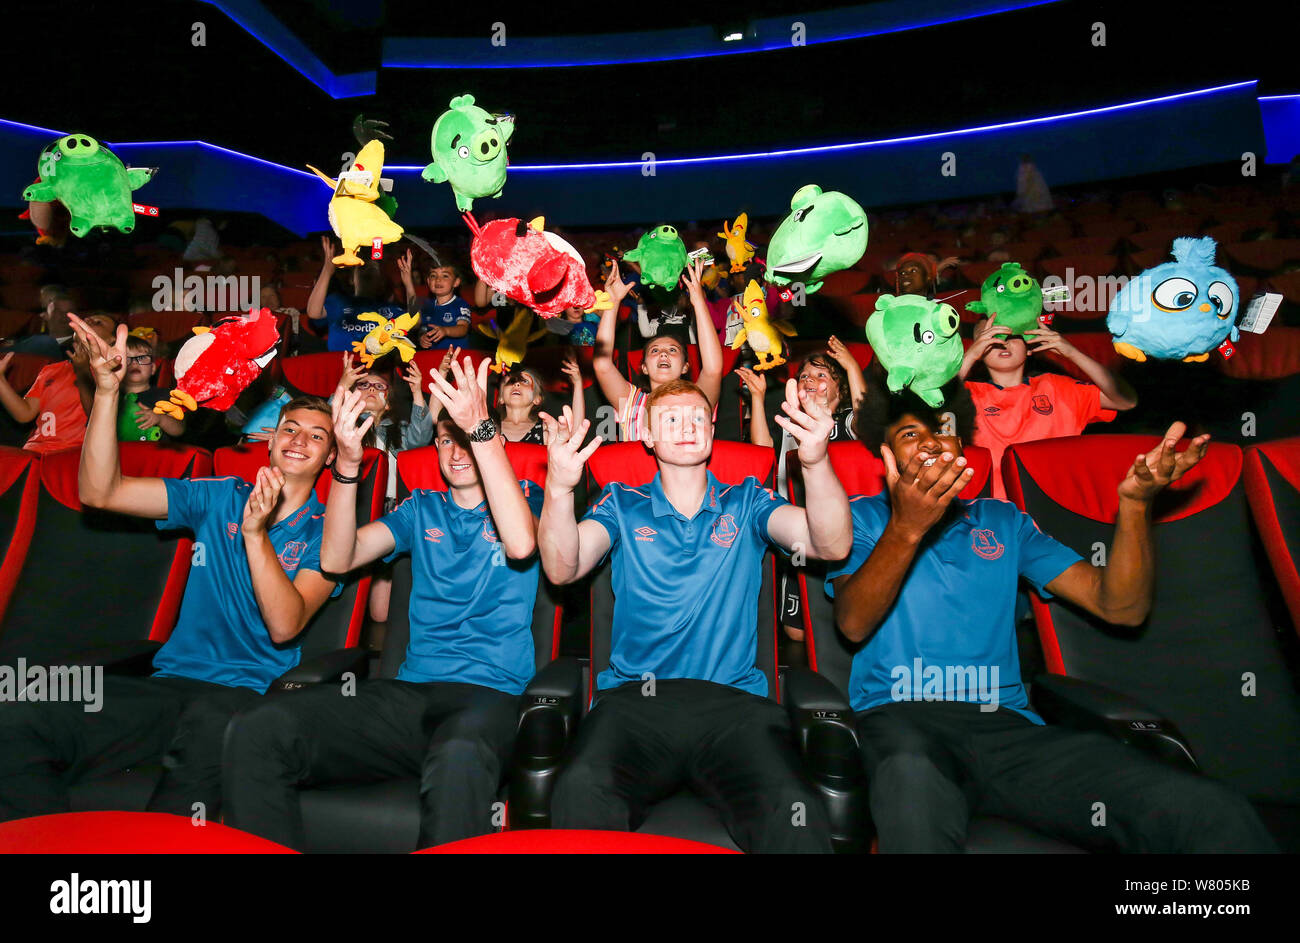 Everton U23 players Ellis Simms, Joe Anderson, Ryan Astley and captain Morgan Feeney pose for a picture with Angry Bird toys during the Cineworld Speke Anniversary and Everton in the Community Screening in Liverpool. Stock Photo